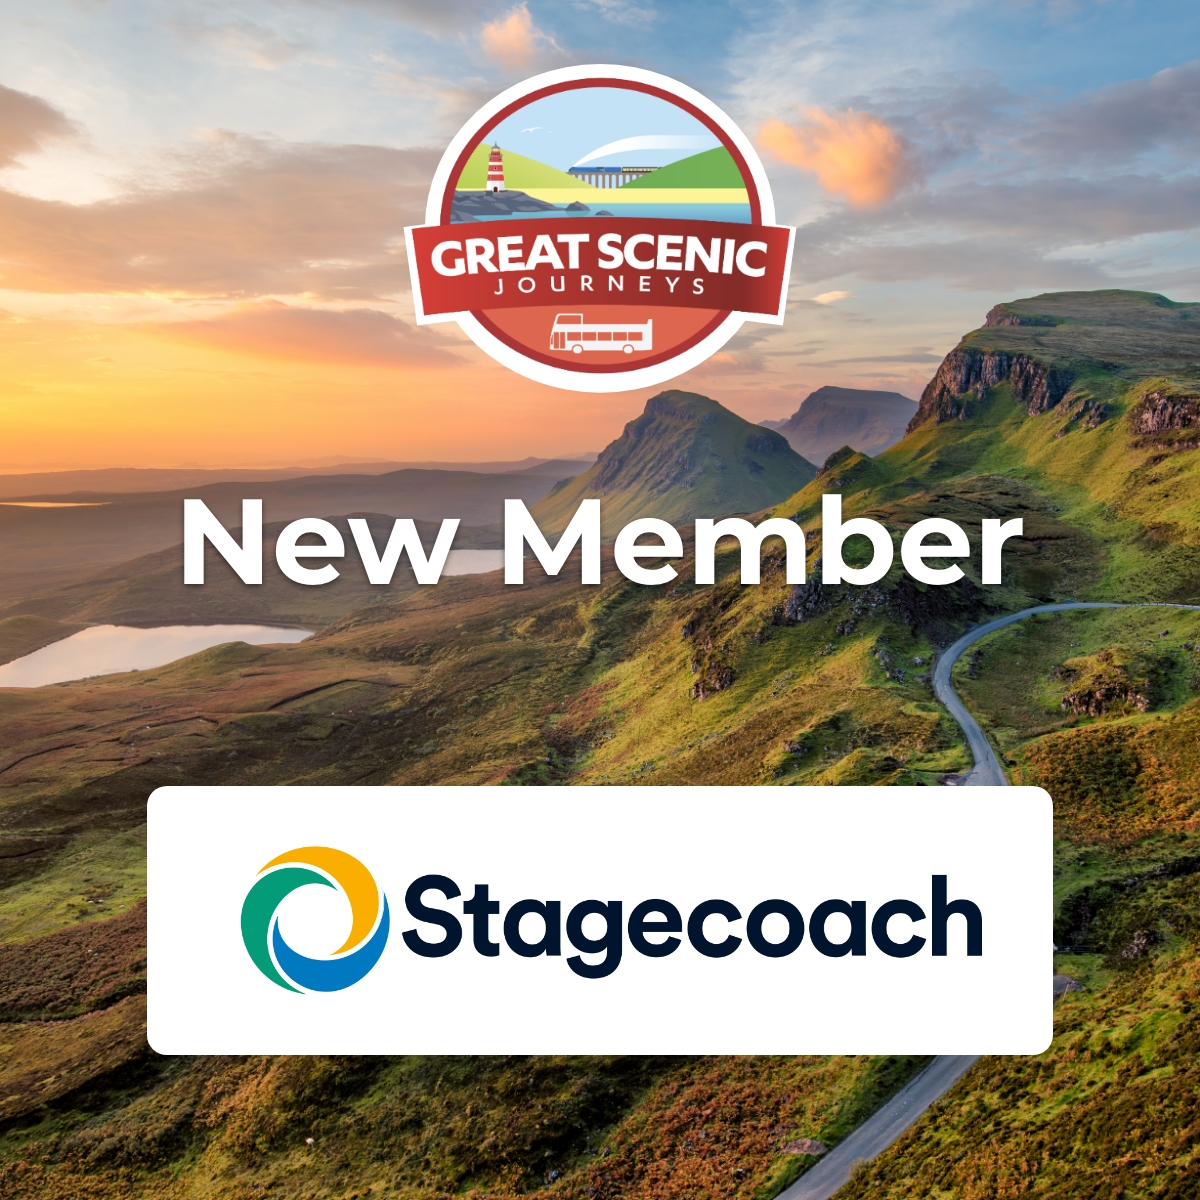 📣 Great Scenic Journeys is thrilled to announce that Stagecoach Highlands has joined our community of scenic transport providers! 🎉

#GreatScenicJourneys #StagecoachHighlands #ScenicRoutes #ScottishHighlands #DiscoverScotland #TravelGoals